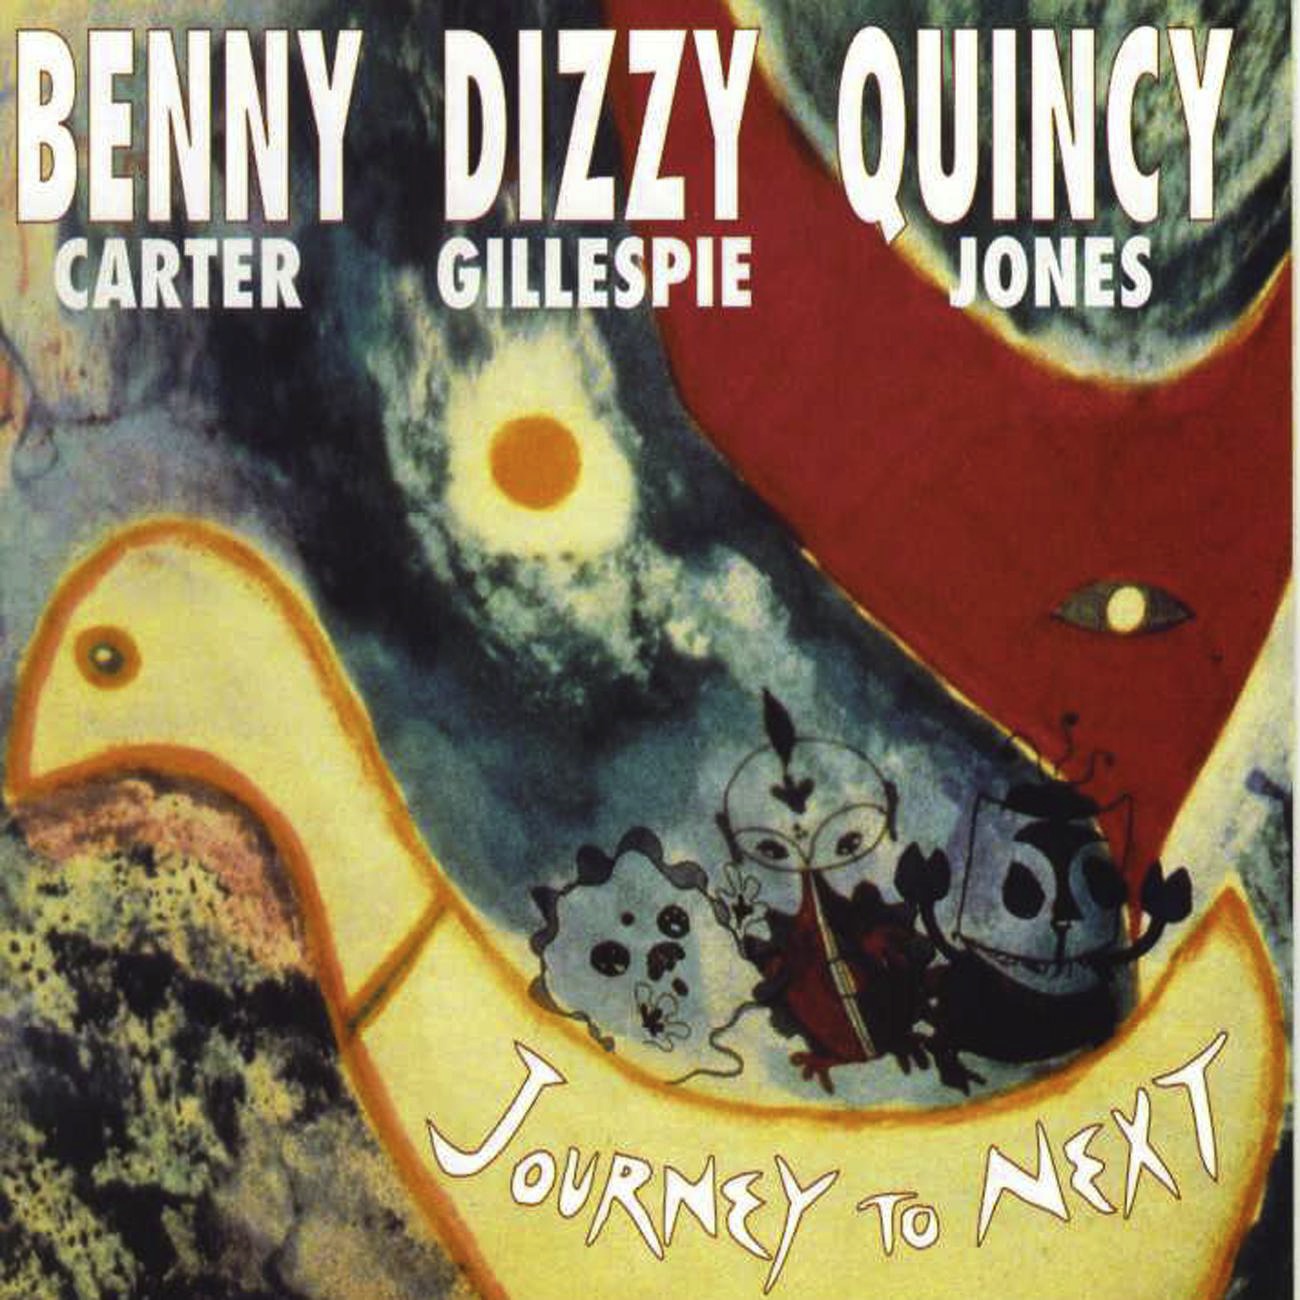 Adventures of an * (Featuring Lionel Hampton) - Benny Carter, Adventures of An *